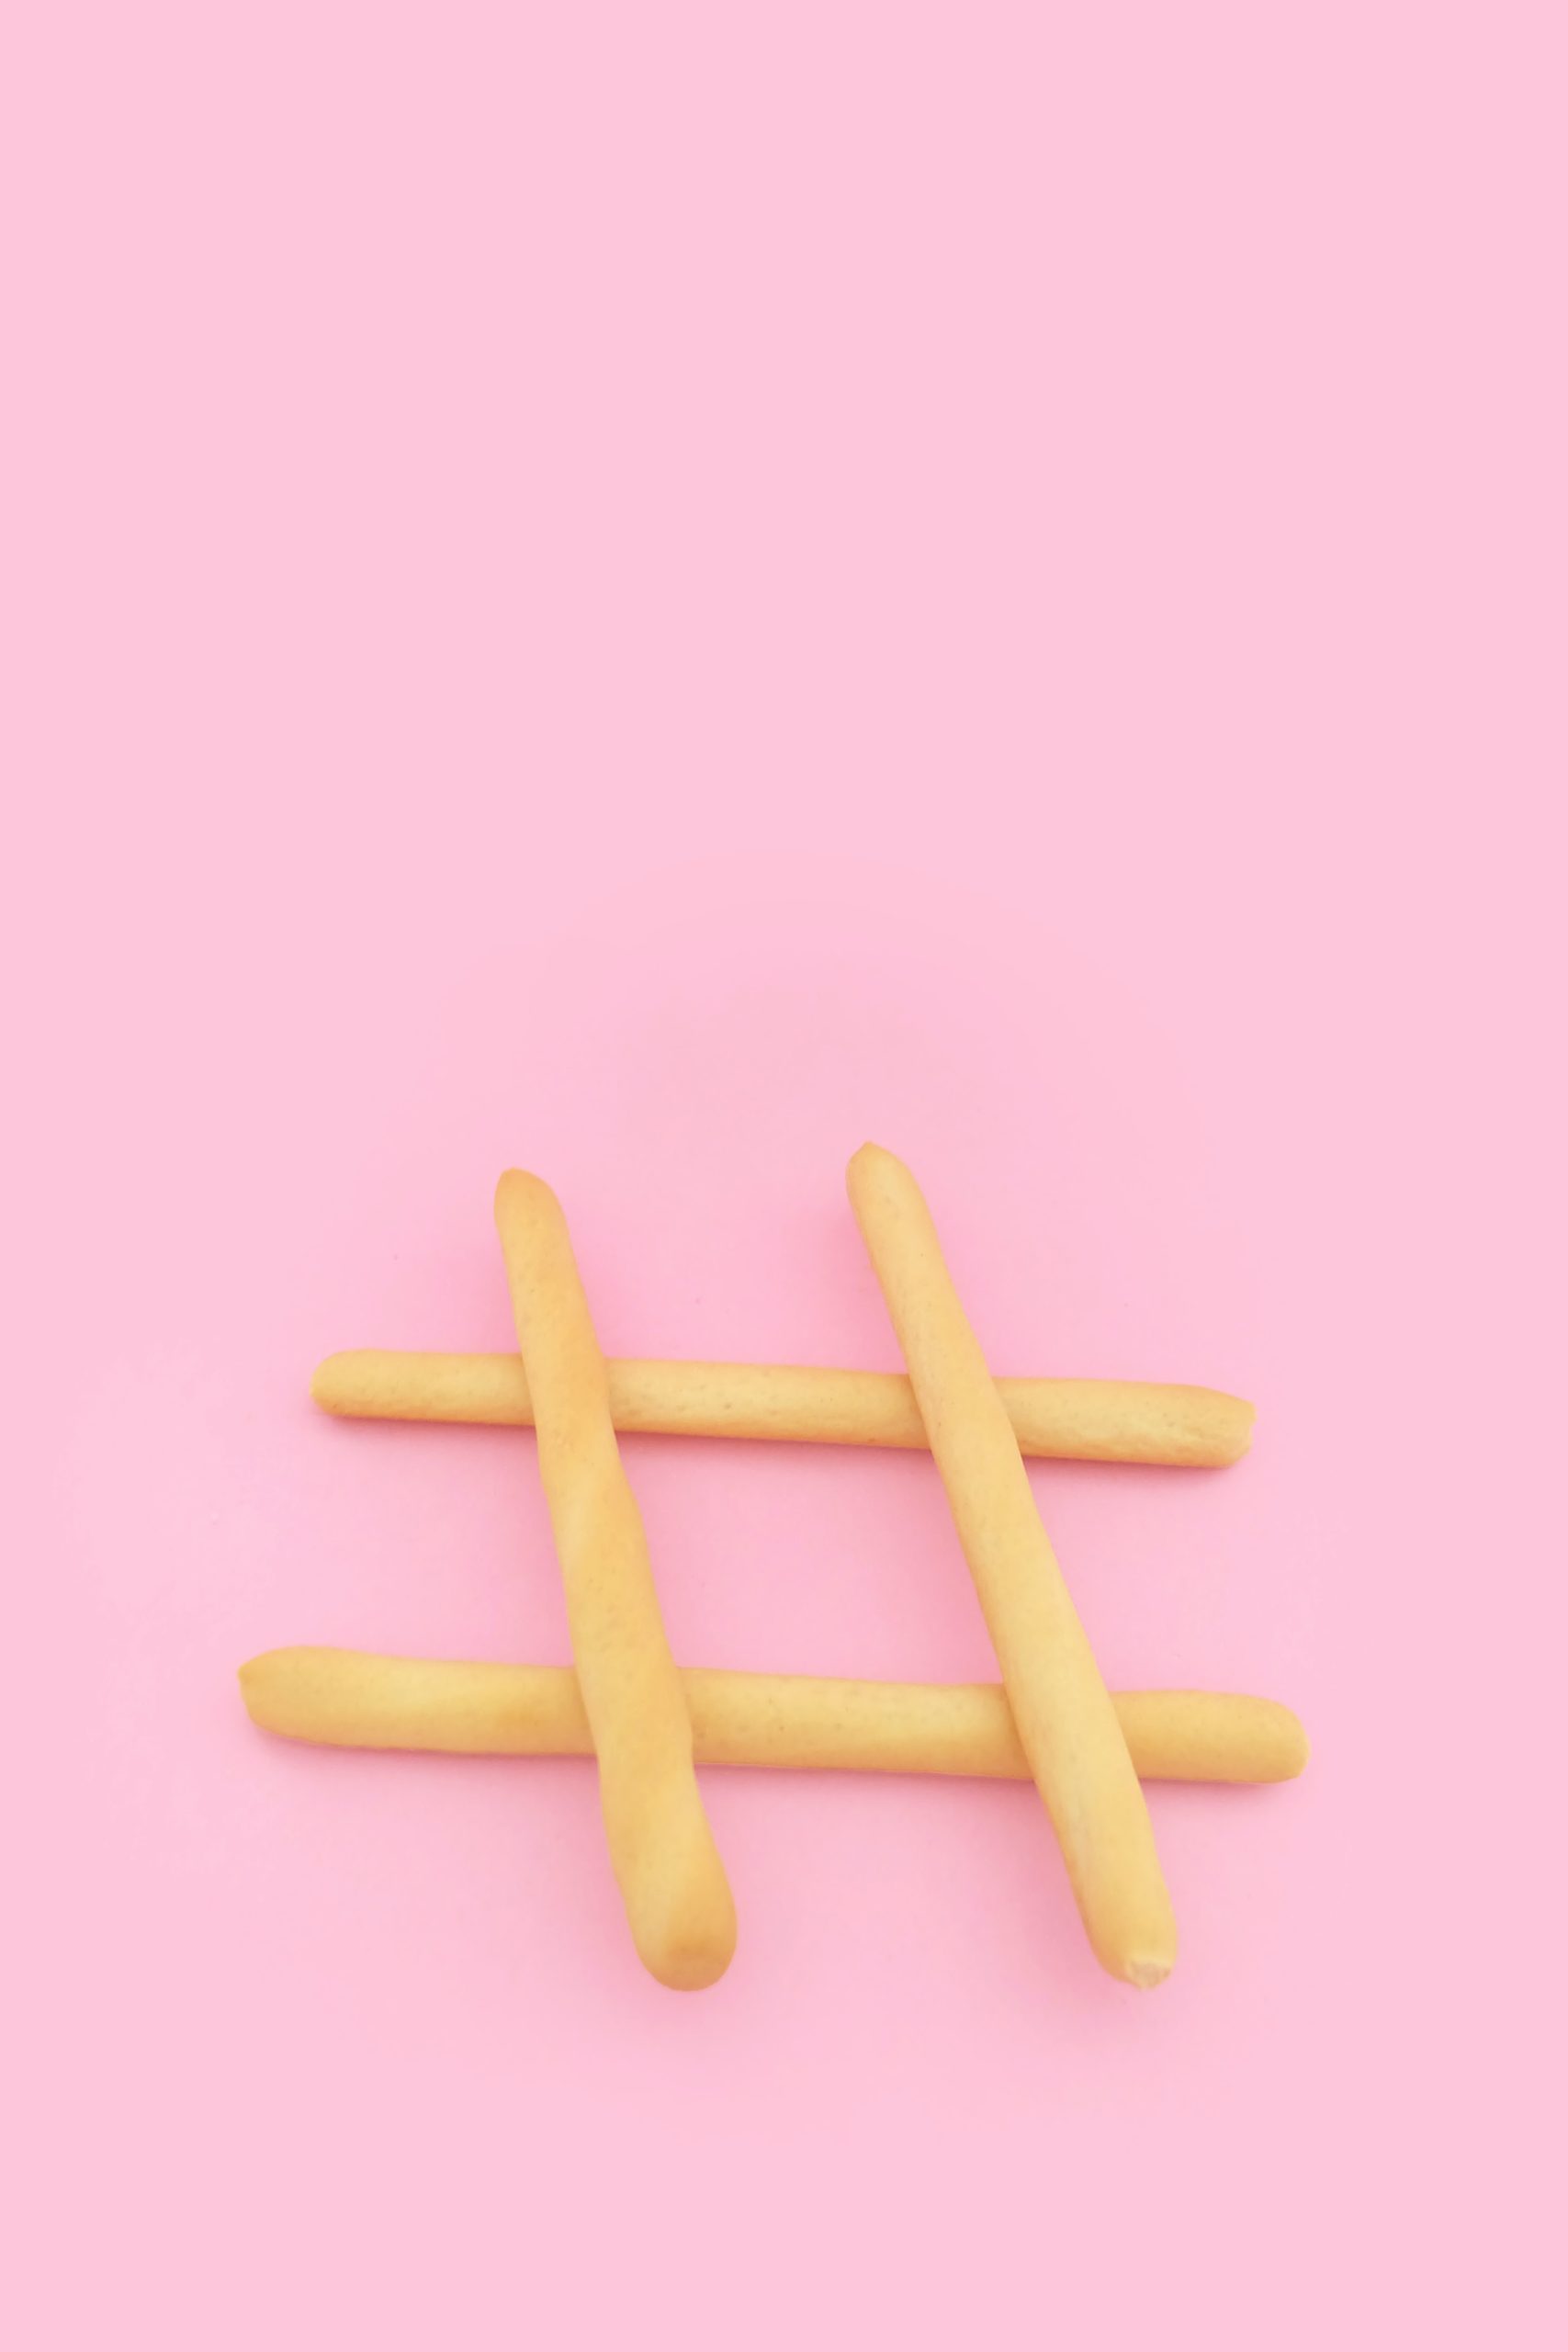 stock-photo-of-hashtag-made-from-breadsticks